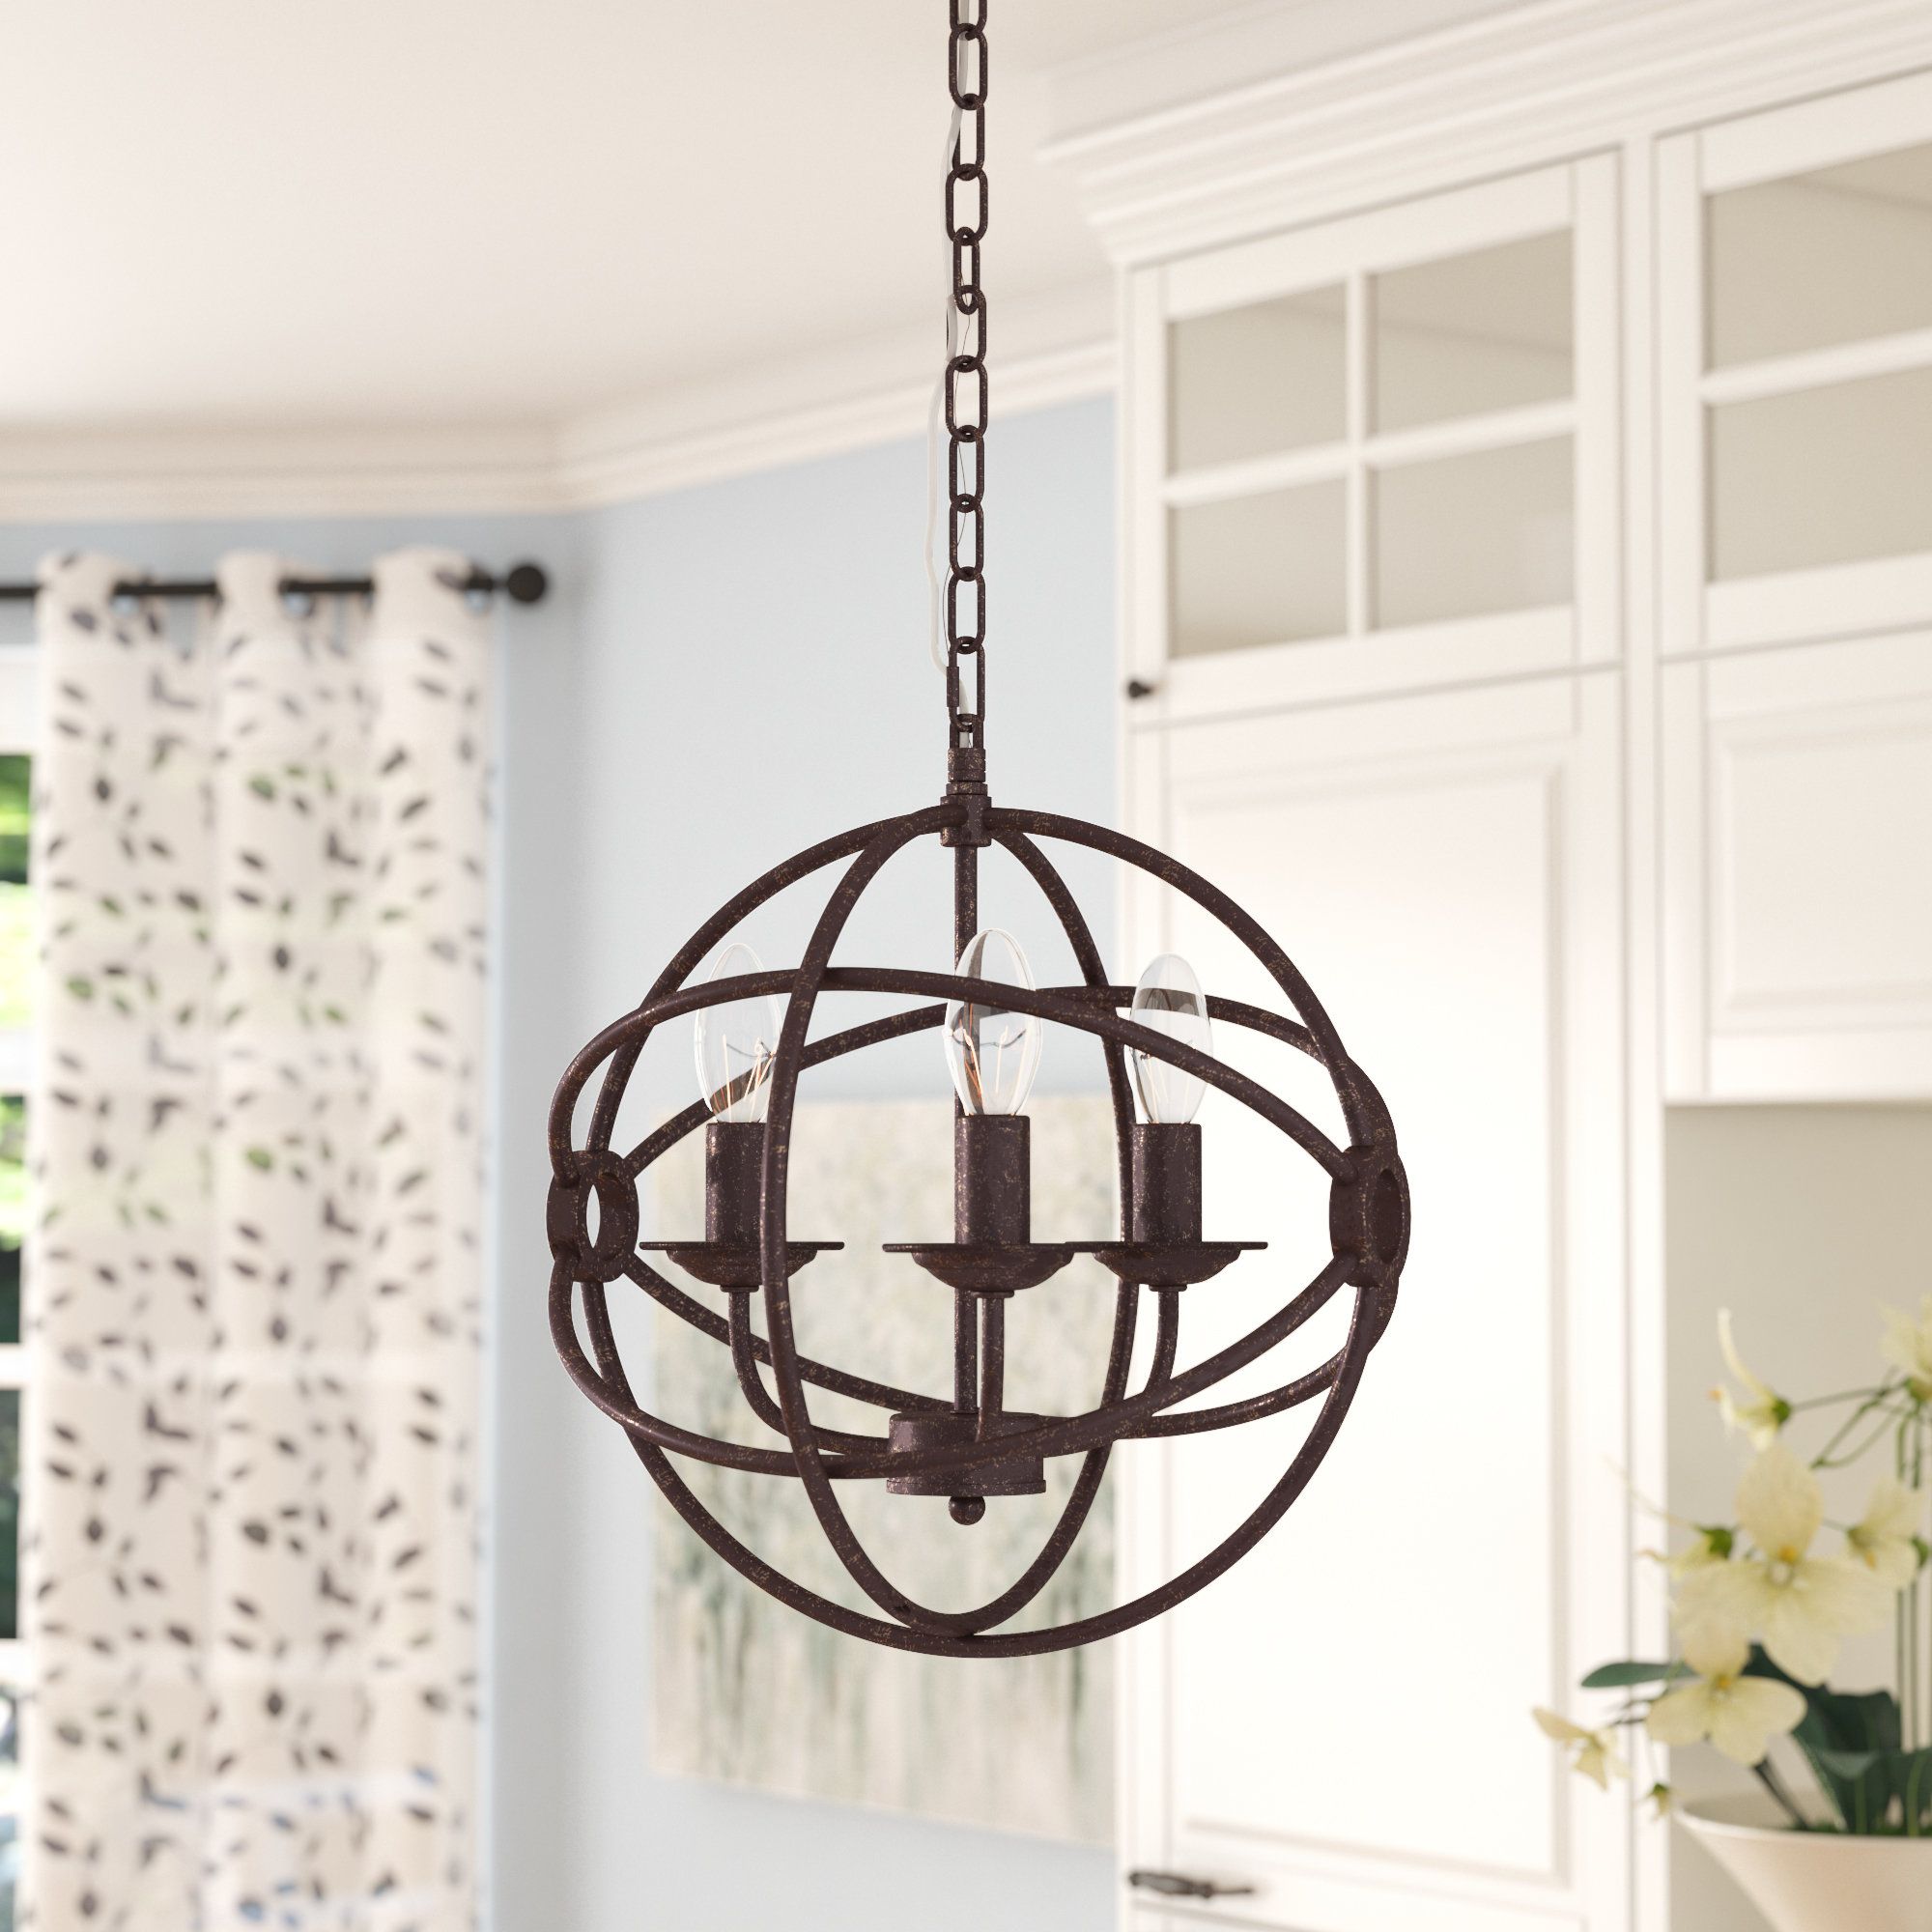 [%globe Chandeliers Sale – Up To 65% Off Until September 30th Within Best And Newest Waldron 5 Light Globe Chandeliers|waldron 5 Light Globe Chandeliers In Current Globe Chandeliers Sale – Up To 65% Off Until September 30th|widely Used Waldron 5 Light Globe Chandeliers Pertaining To Globe Chandeliers Sale – Up To 65% Off Until September 30th|popular Globe Chandeliers Sale – Up To 65% Off Until September 30th With Regard To Waldron 5 Light Globe Chandeliers%] (View 15 of 25)